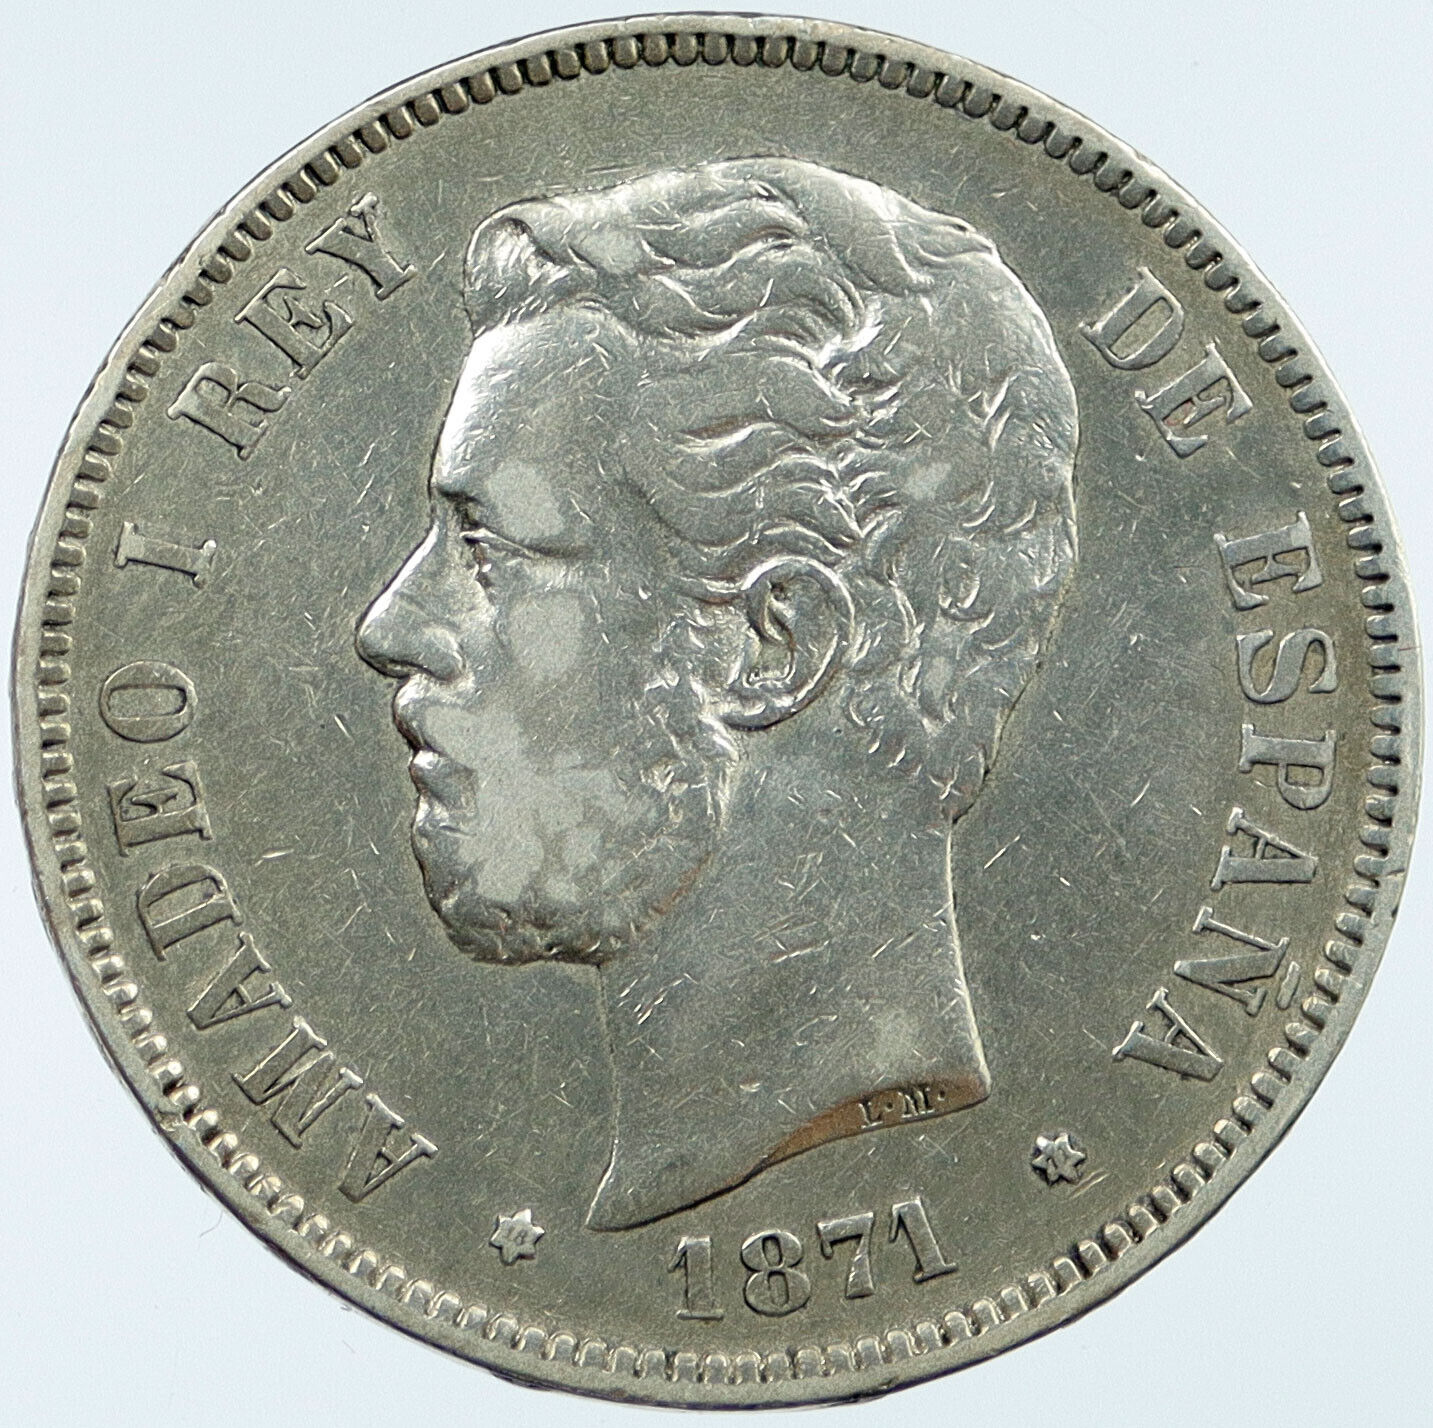 1871 SPAIN King Amadeo I Large Antique Silver 5 Pesetas Spanish Coin i118174